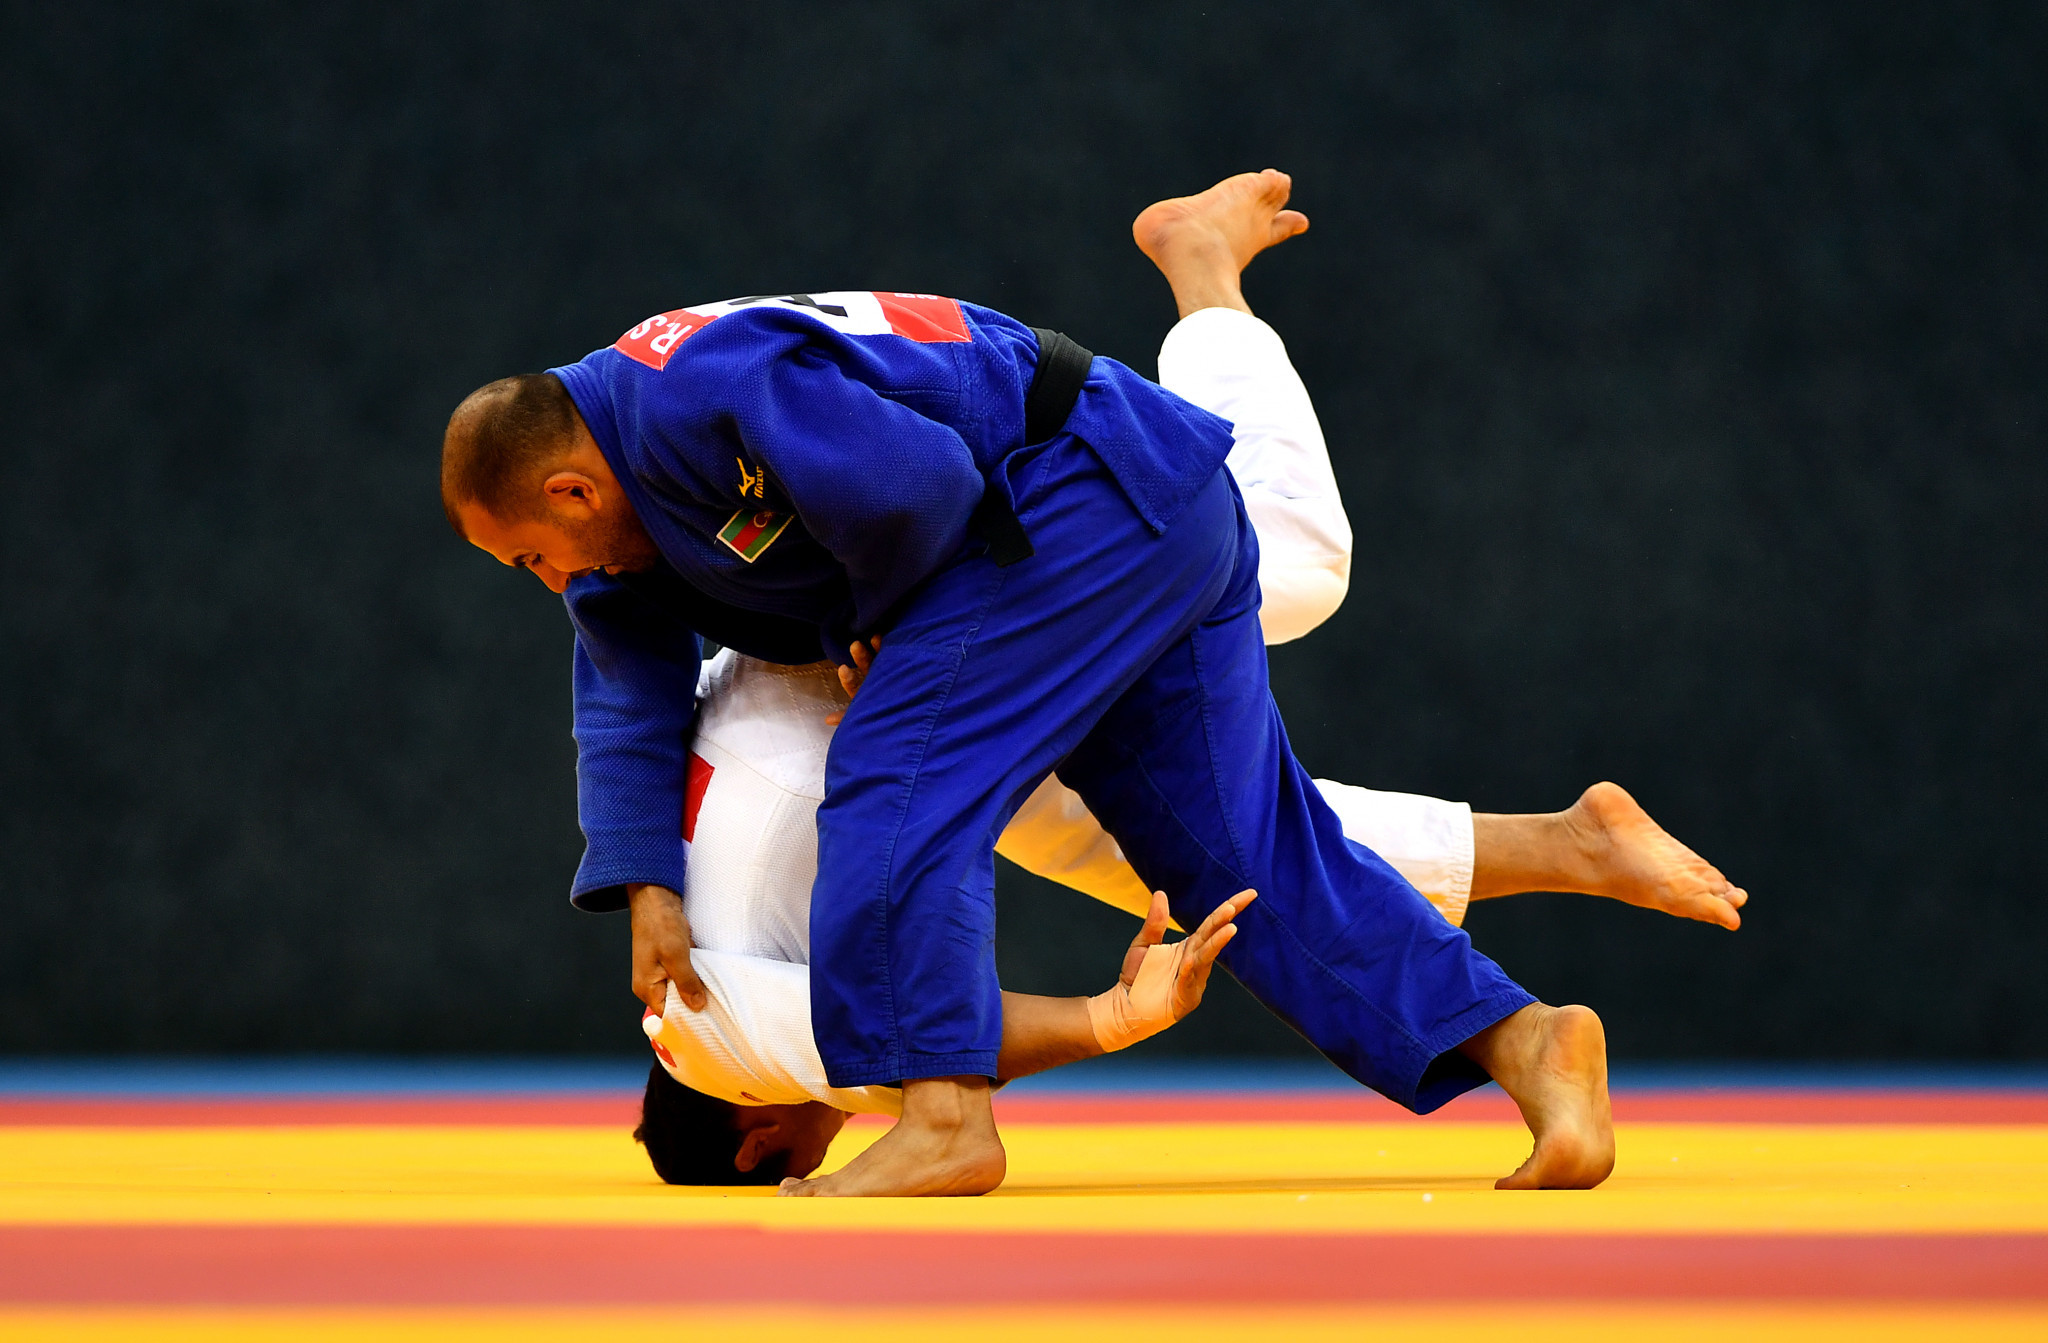 Brazil, Turkey and Kazakhstan are set to host IBSA Judo Grand Prix events in 2022 ©Getty Images